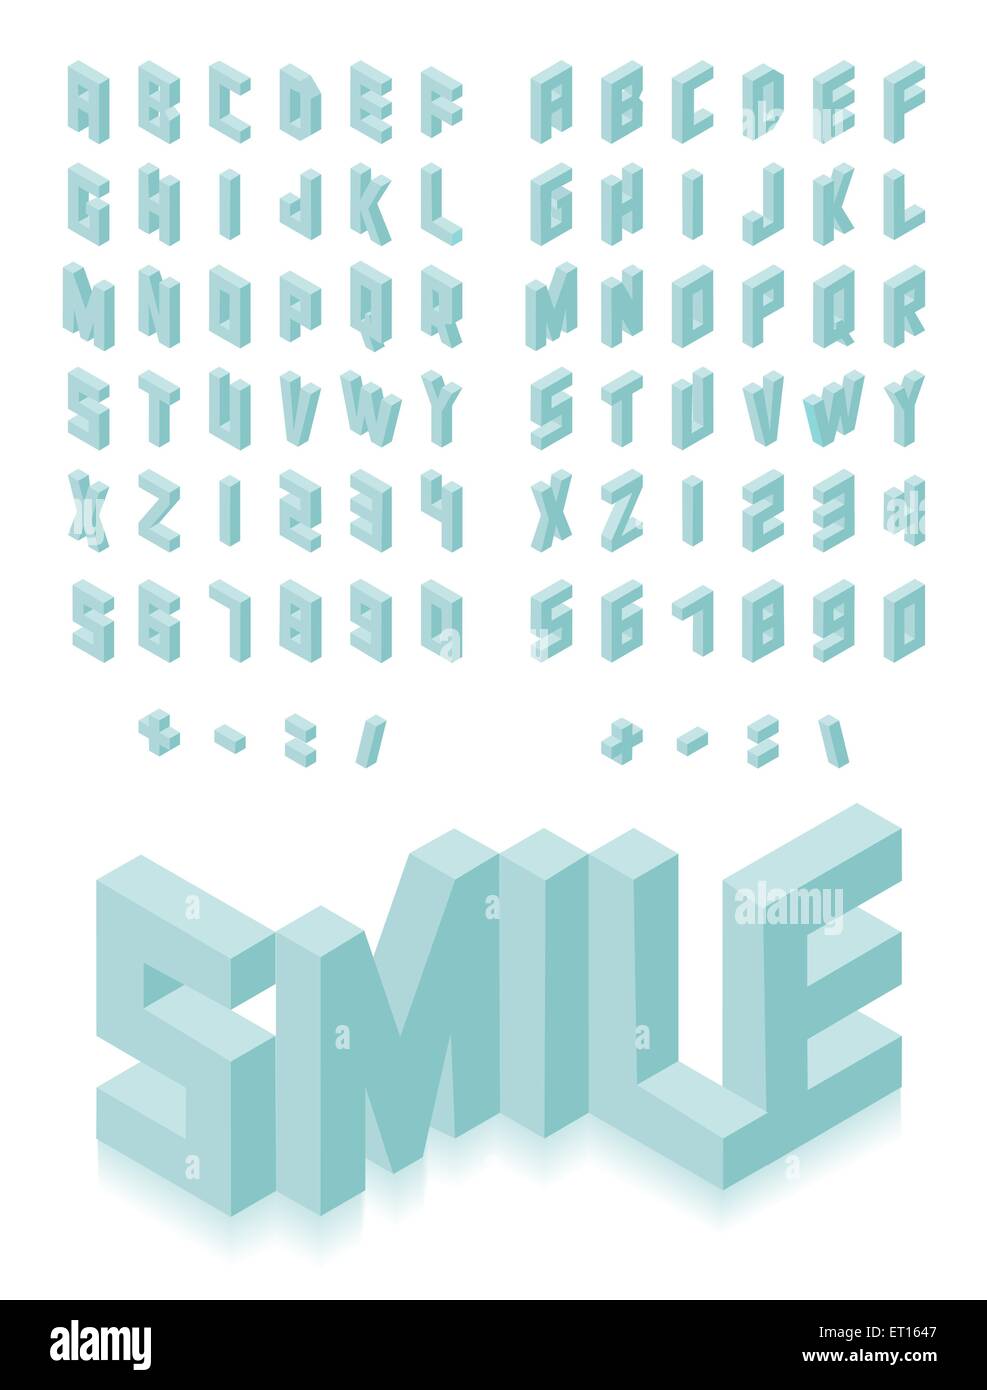 Isometric 3d type font set isolated background illustration. EPS10 vector file. Stock Vector